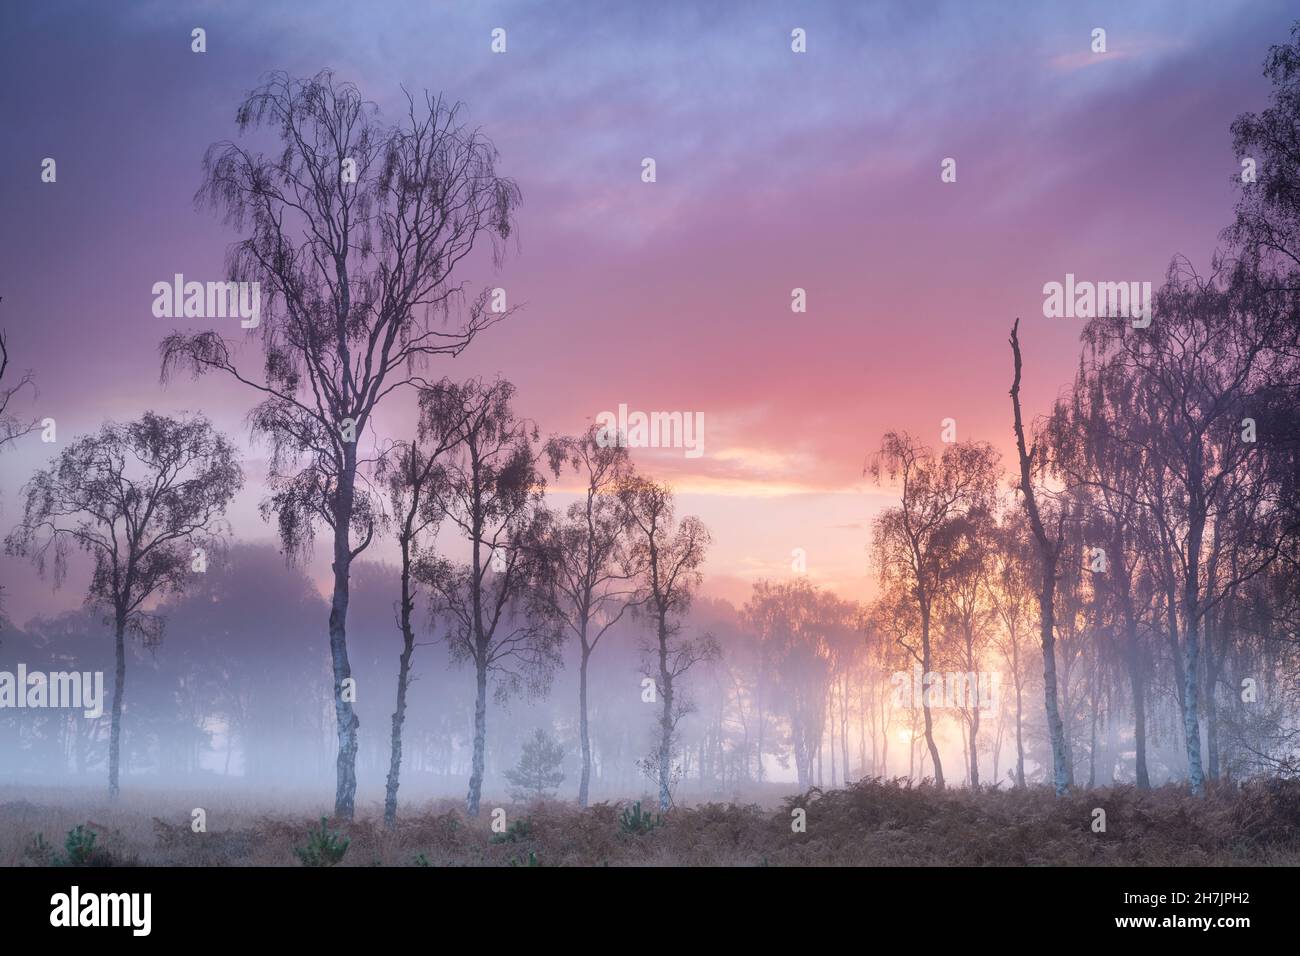 Misty cool Autumn daybreak at Strensall Common Nature Reserve near York, North Yorkshire, England. Stock Photo